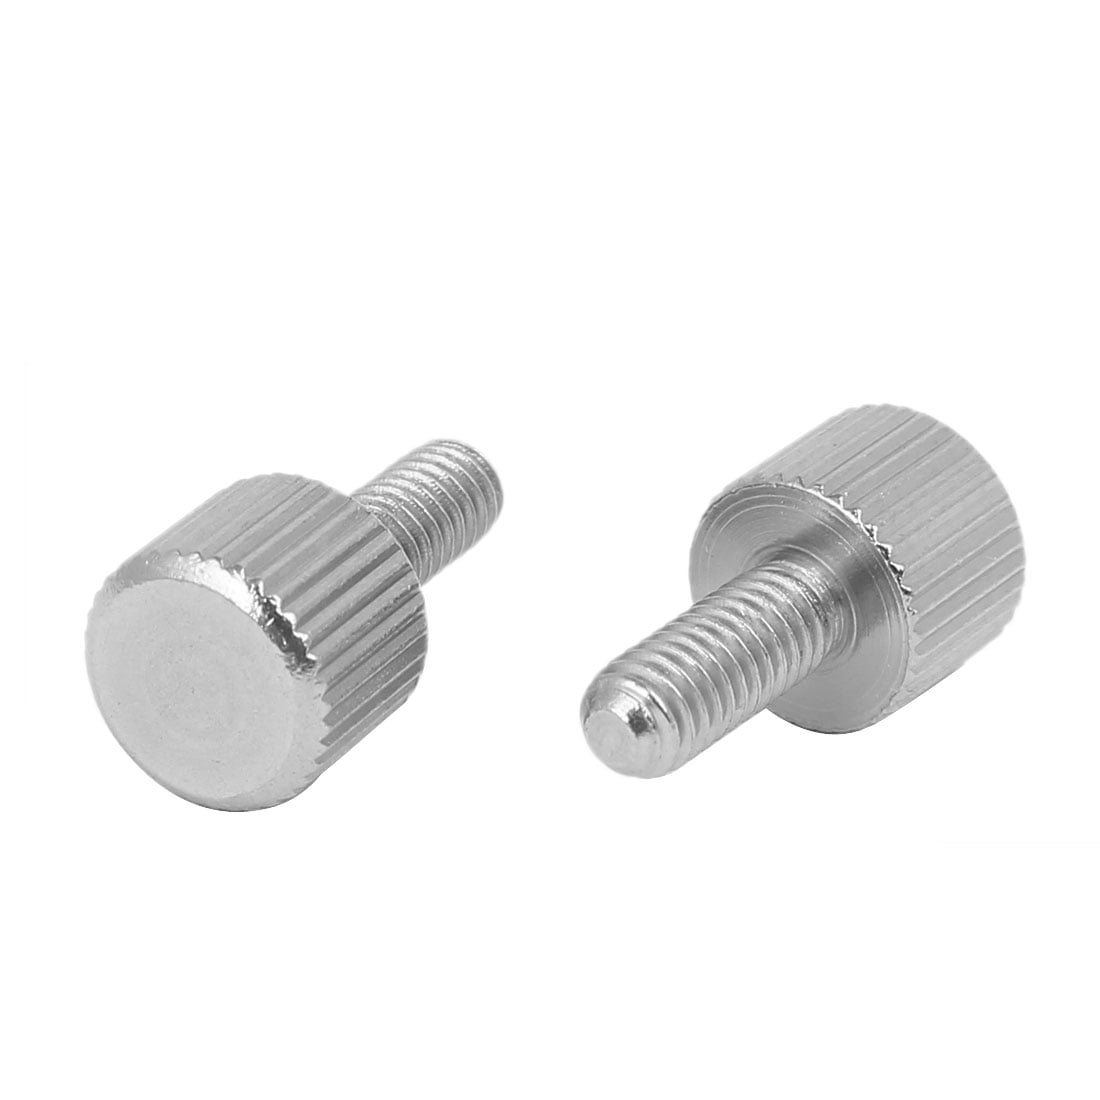 NEW  M4 x 8mm Toolless Thumb Screw Stainless Steel K98 